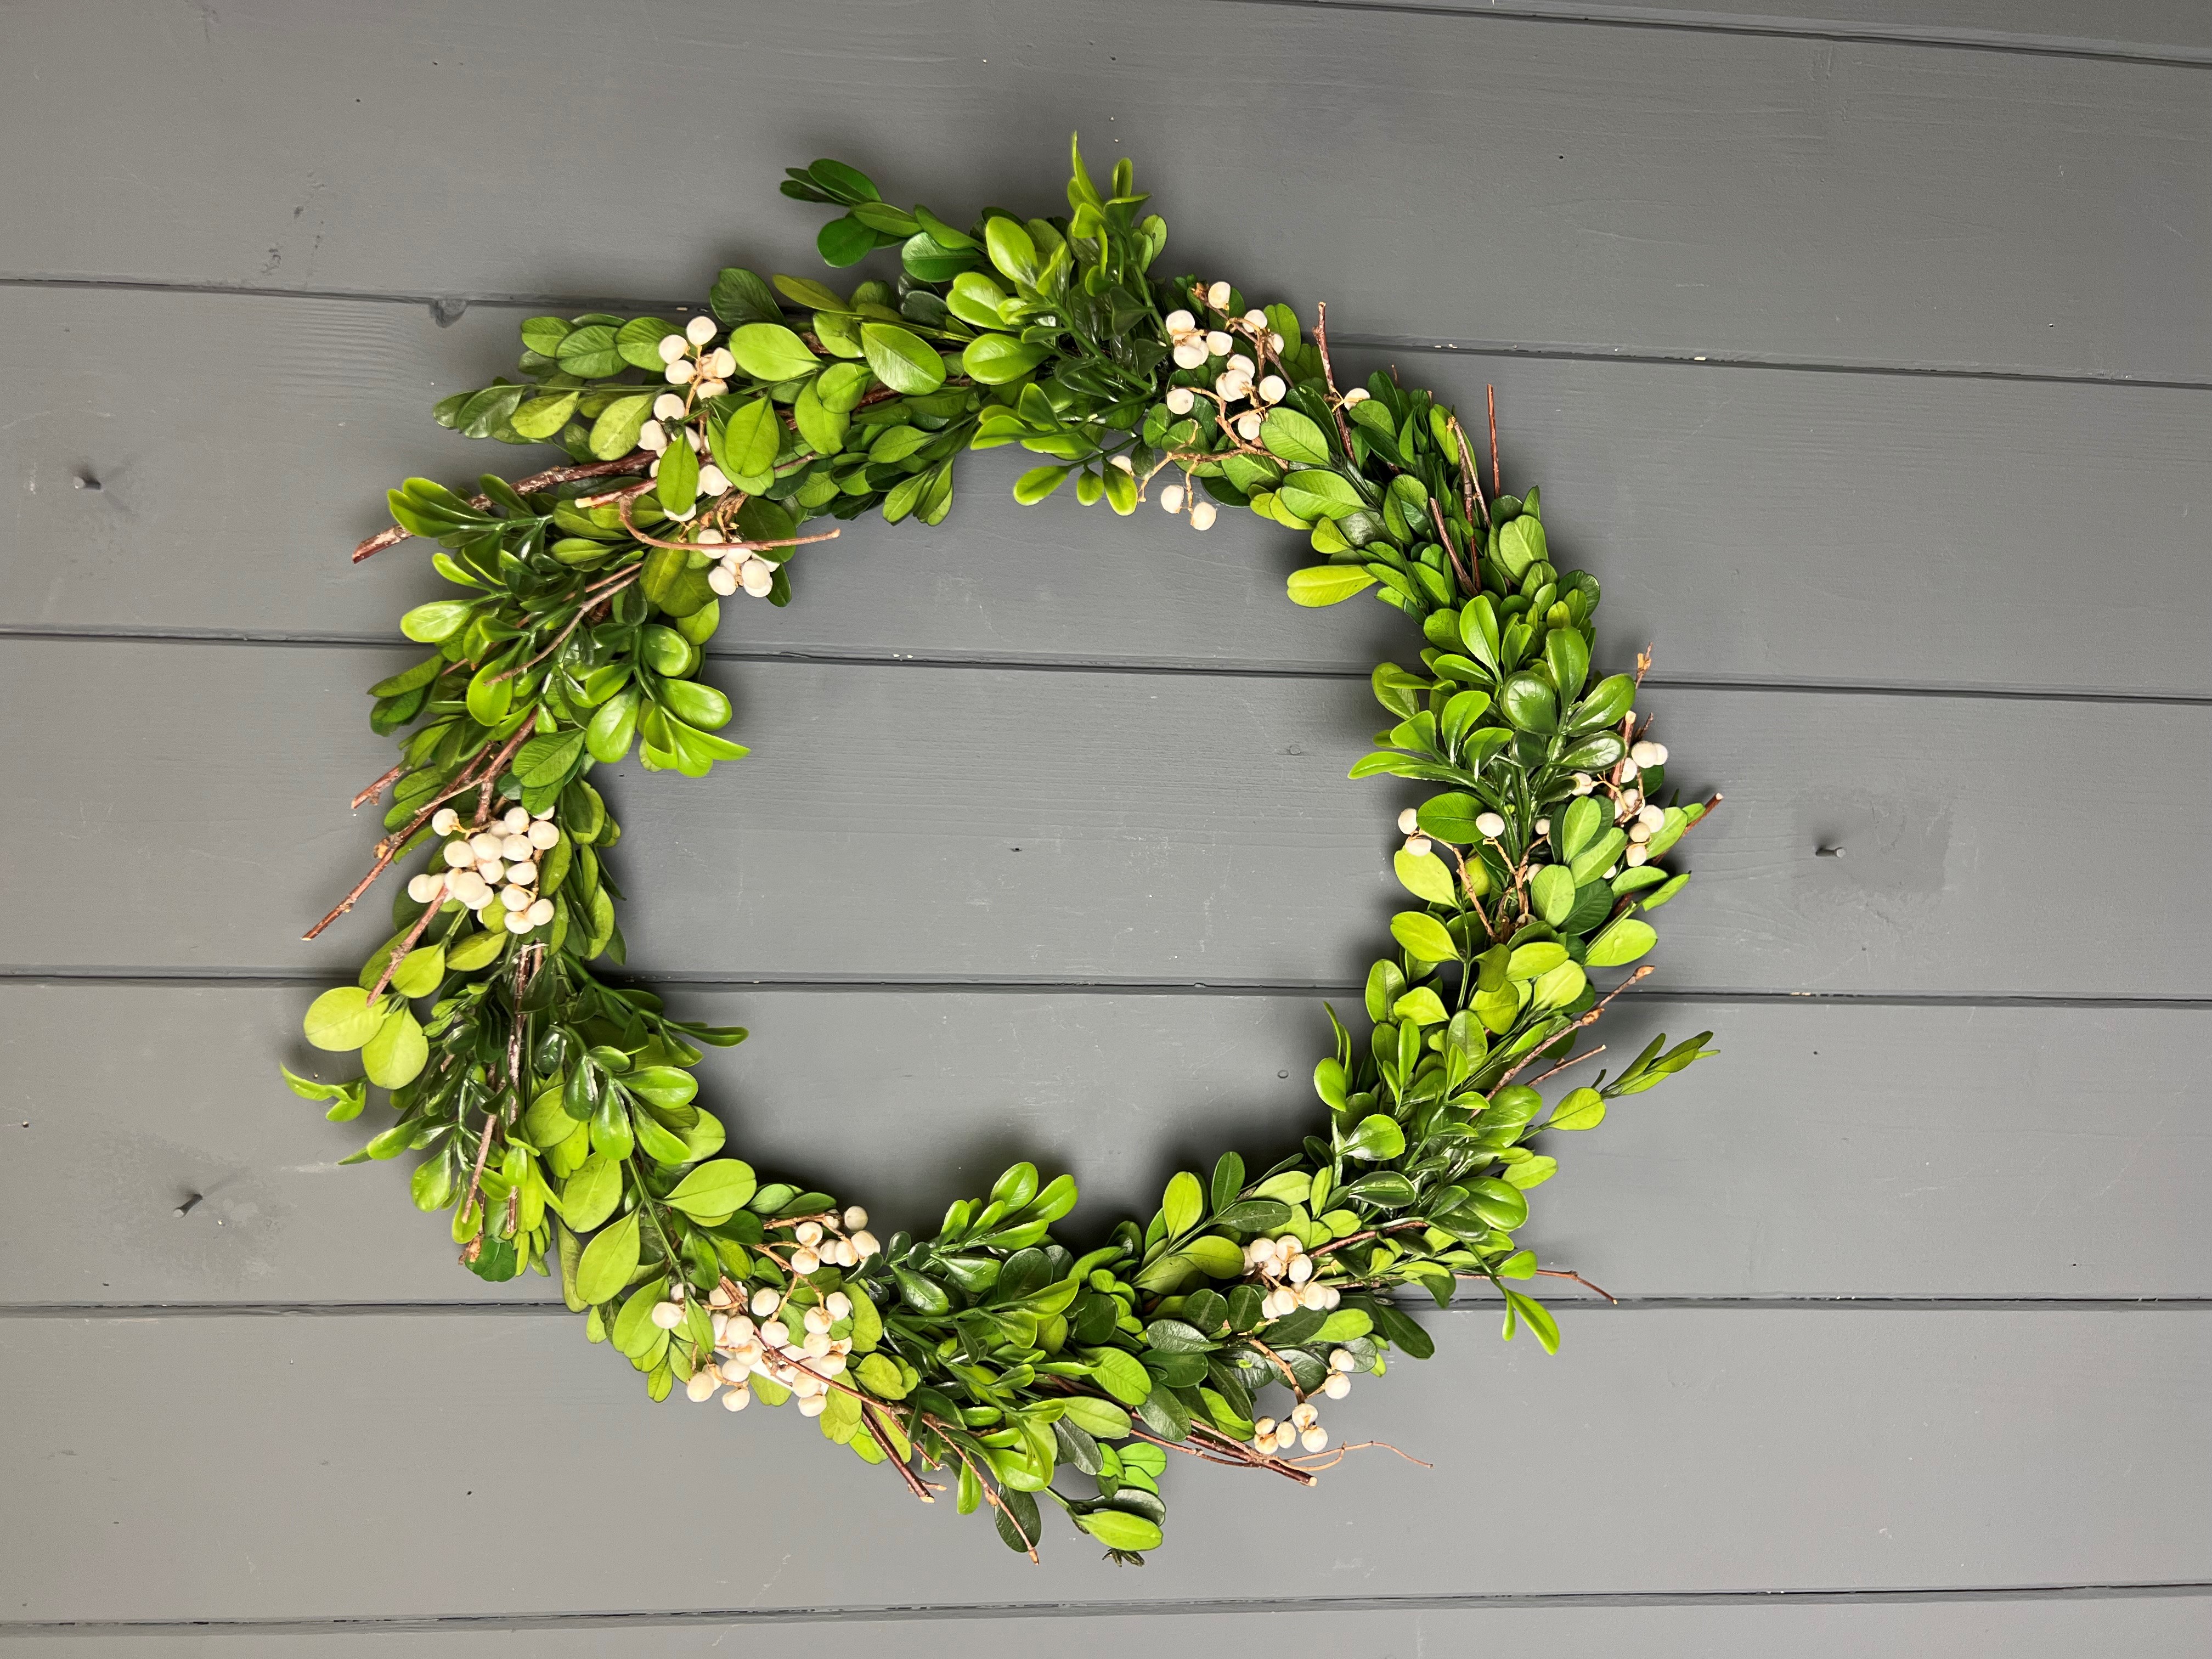 Green Natural Wreath with White Berries